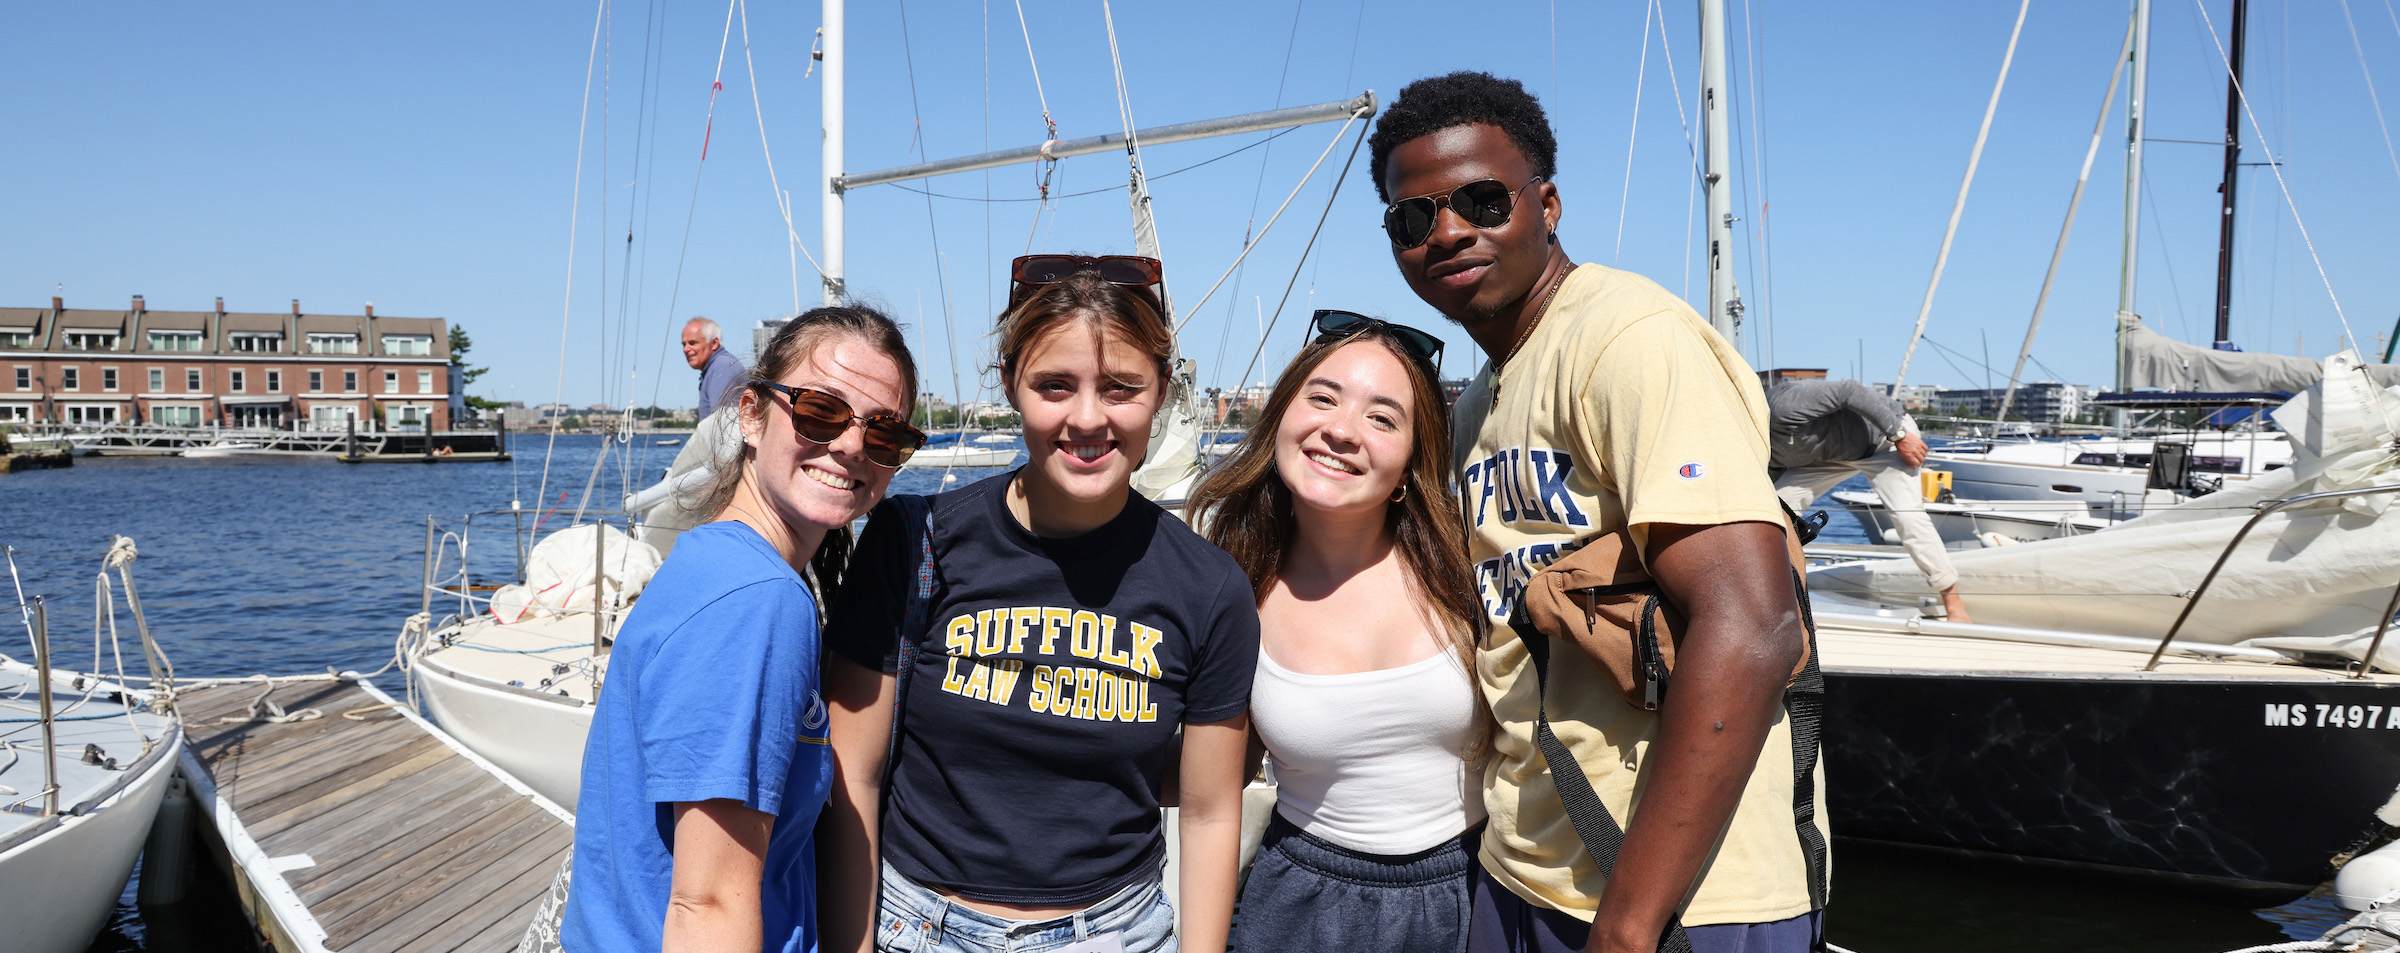 Four Suffolk students pose for a photo together.